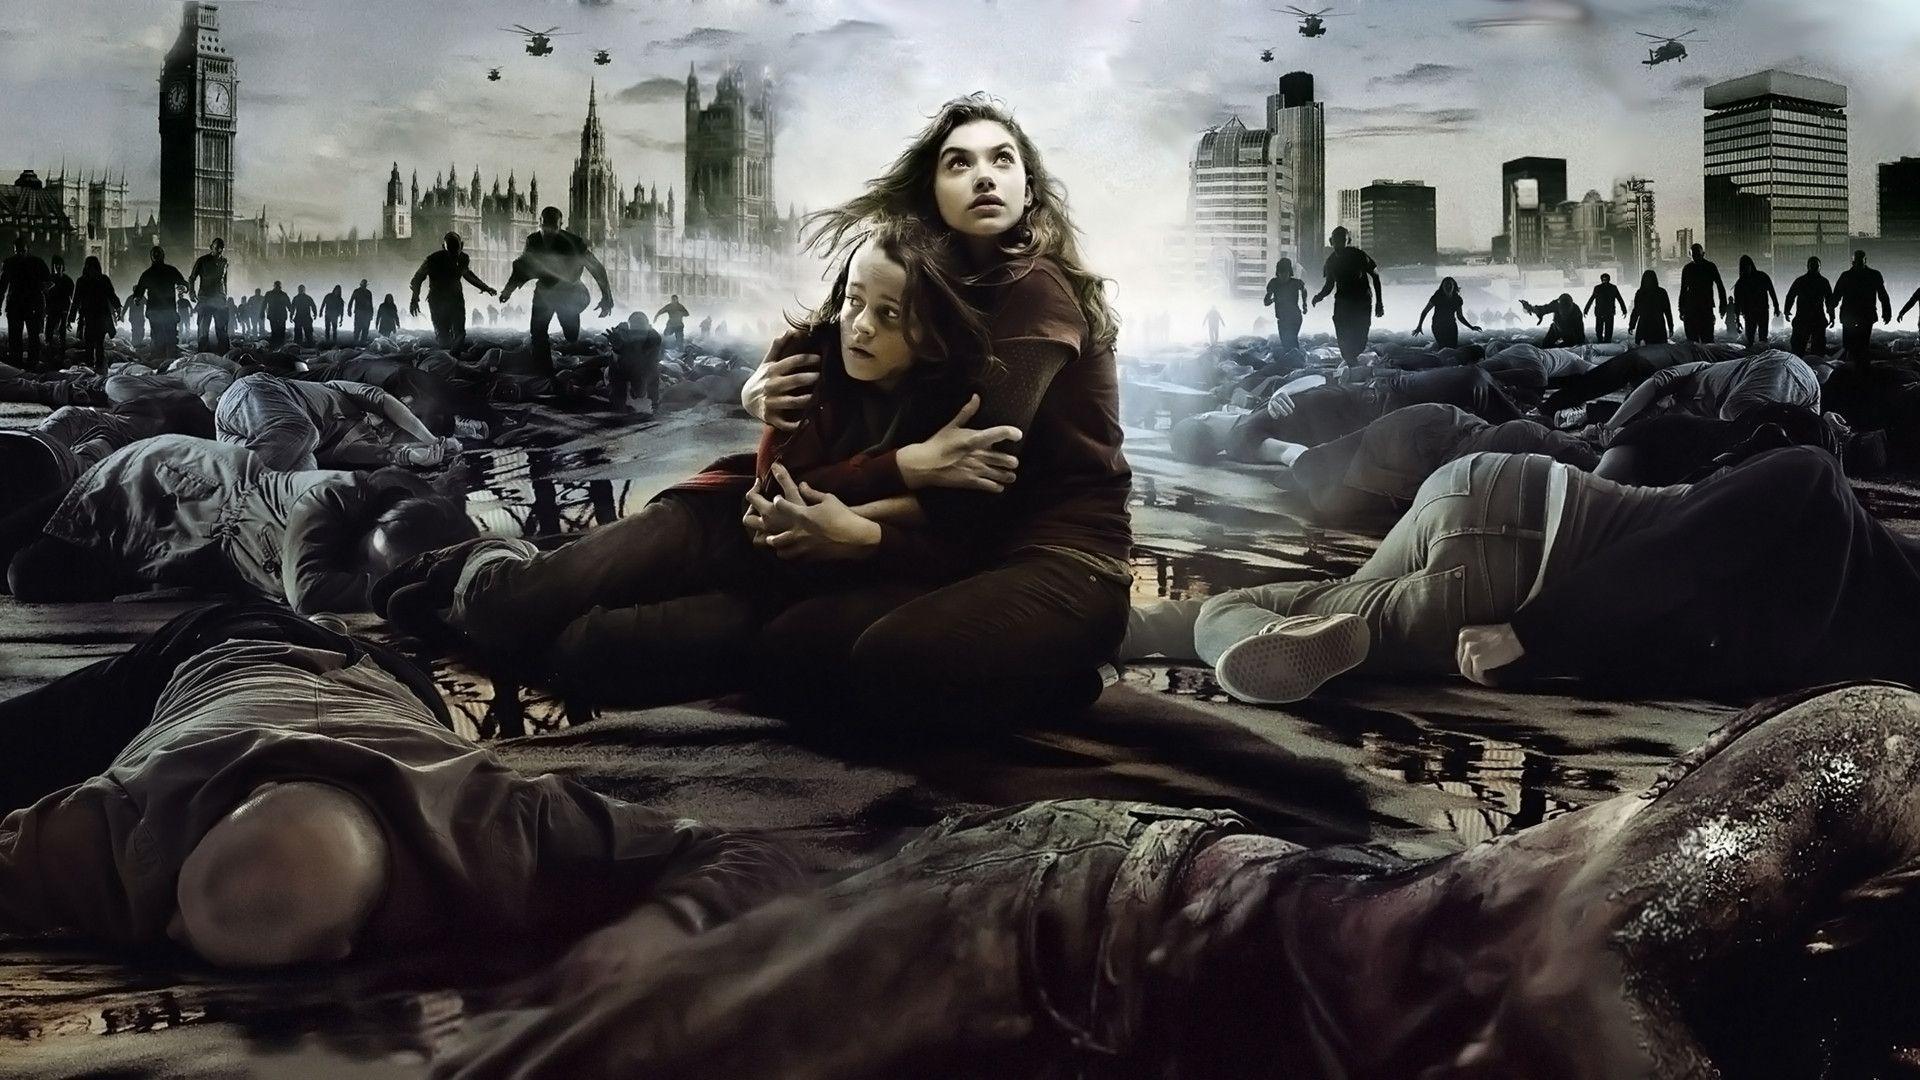 Download Wallpaper 1920x1080 28 weeks later, zombies, alone, city